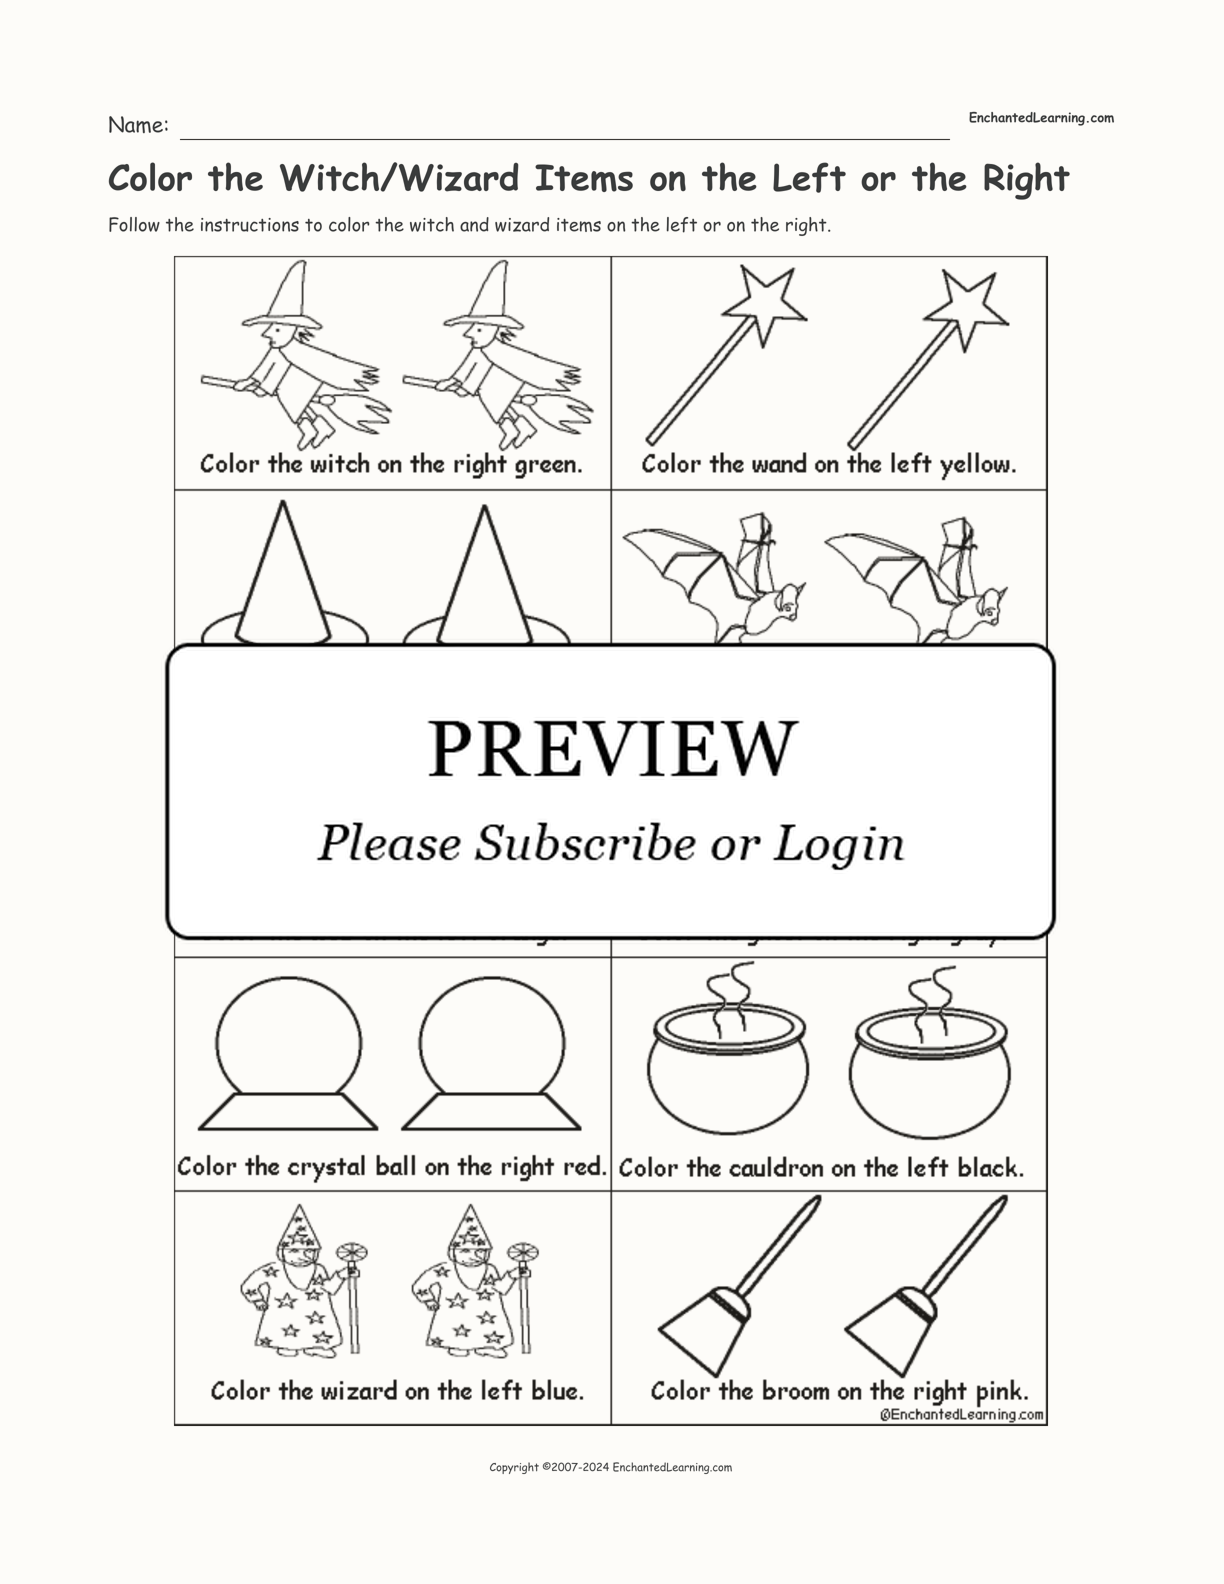 Color the Witch/Wizard Items on the Left or the Right interactive worksheet page 1